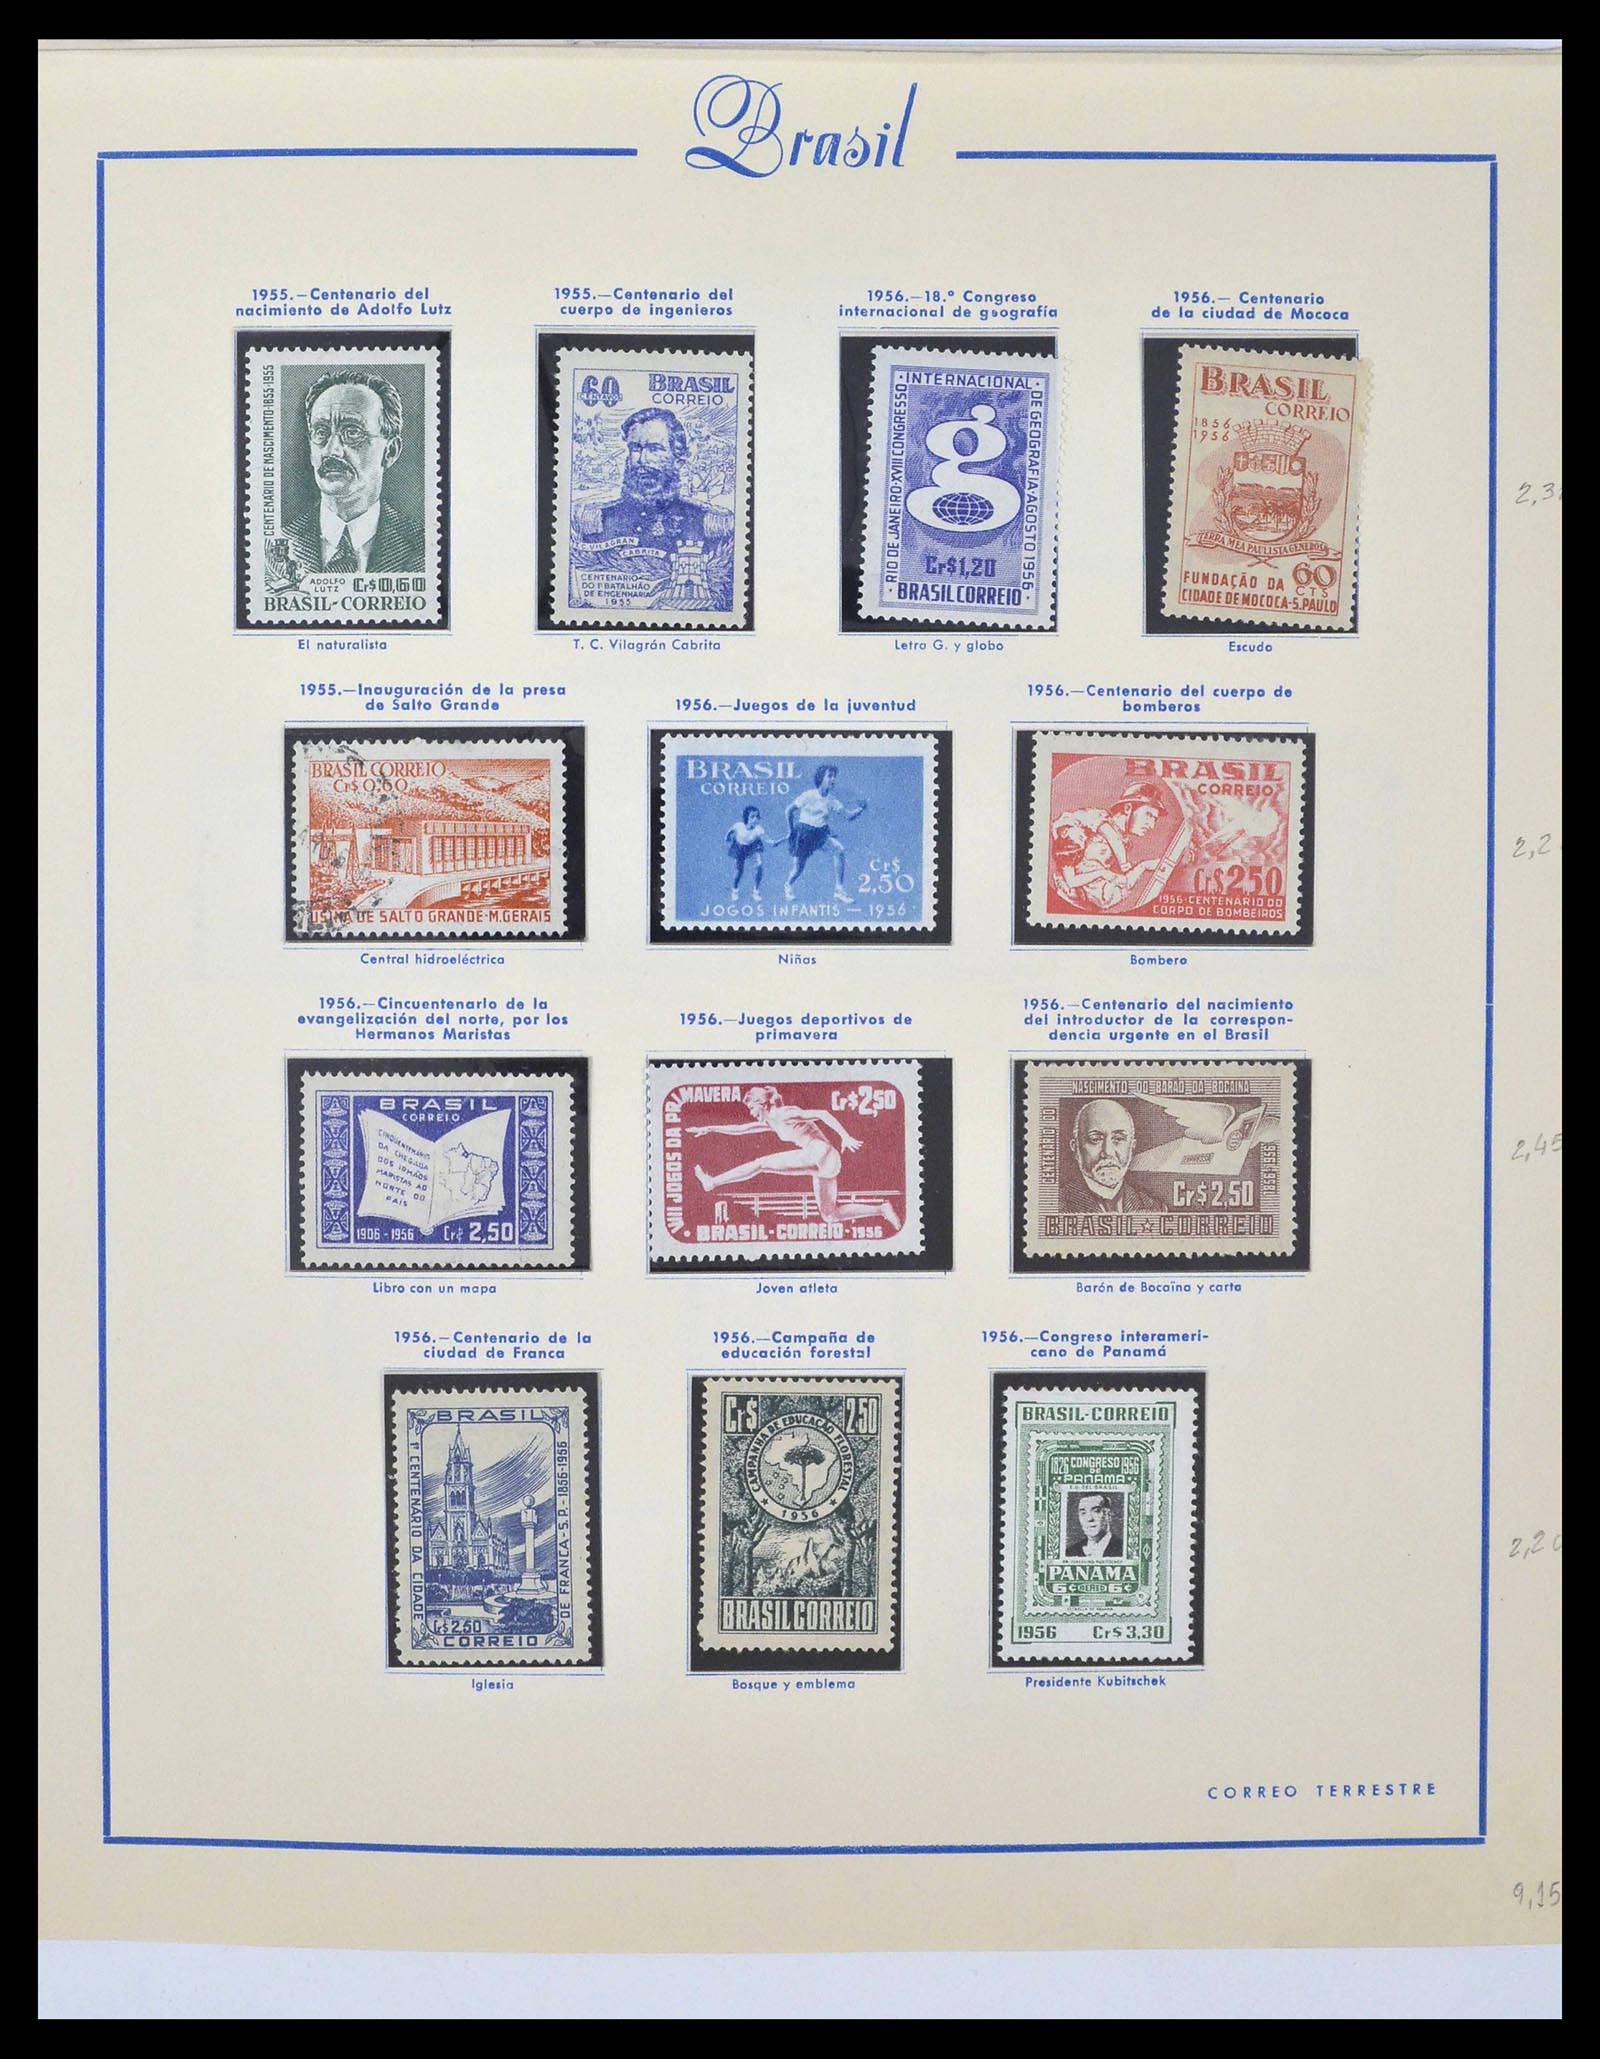 39245 0039 - Stamp collection 39245 Brazil 1843-1968.